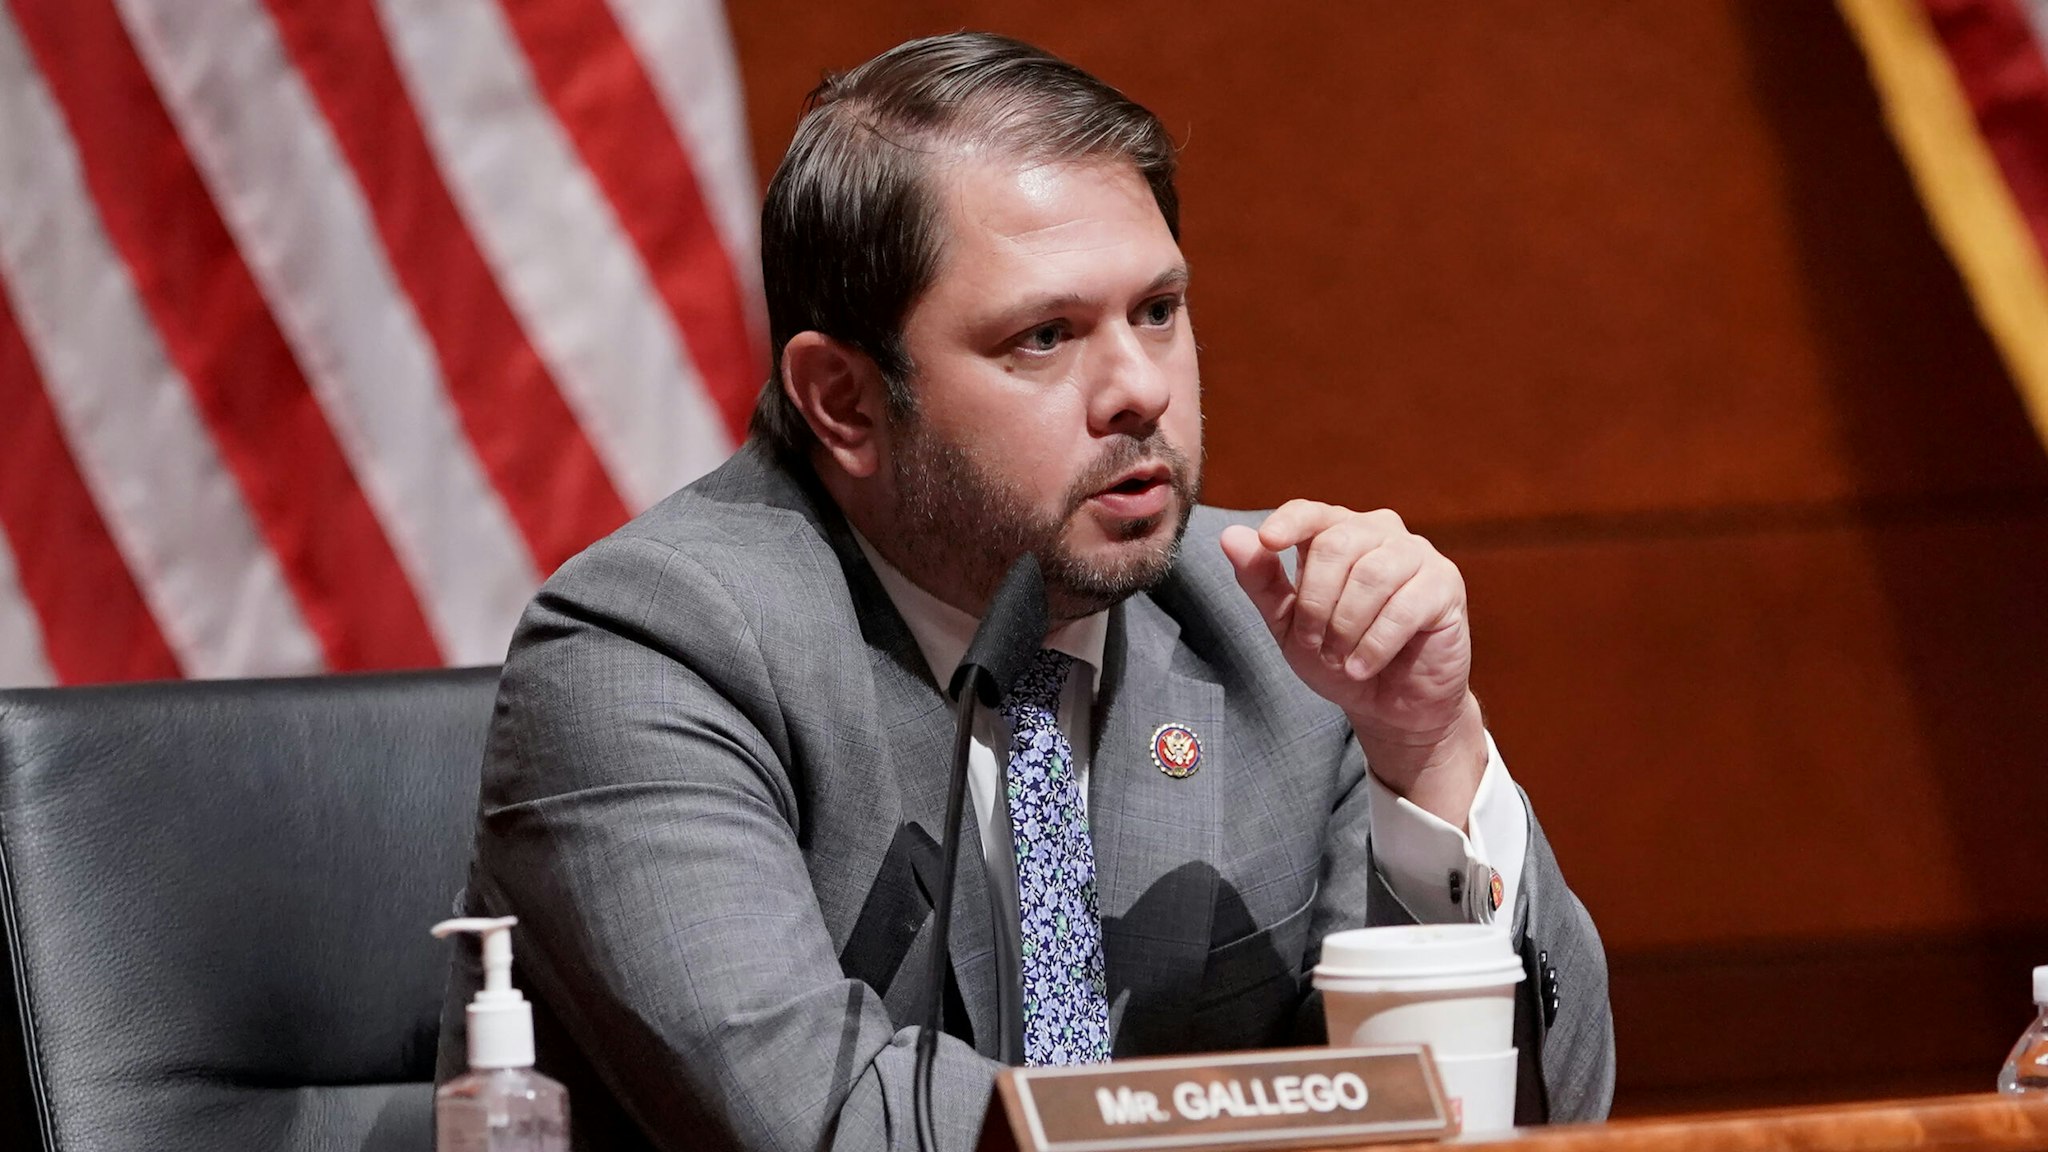 Representative Ruben Gallego, a Democrat from Arizona, speaks during a House Armed Services Committee hearing in Washington, D.C., U.S, on Thursday, July 9, 2020. The hearing is titled "Department of Defense Authorities and Roles Related to Civilian Law Enforcement."